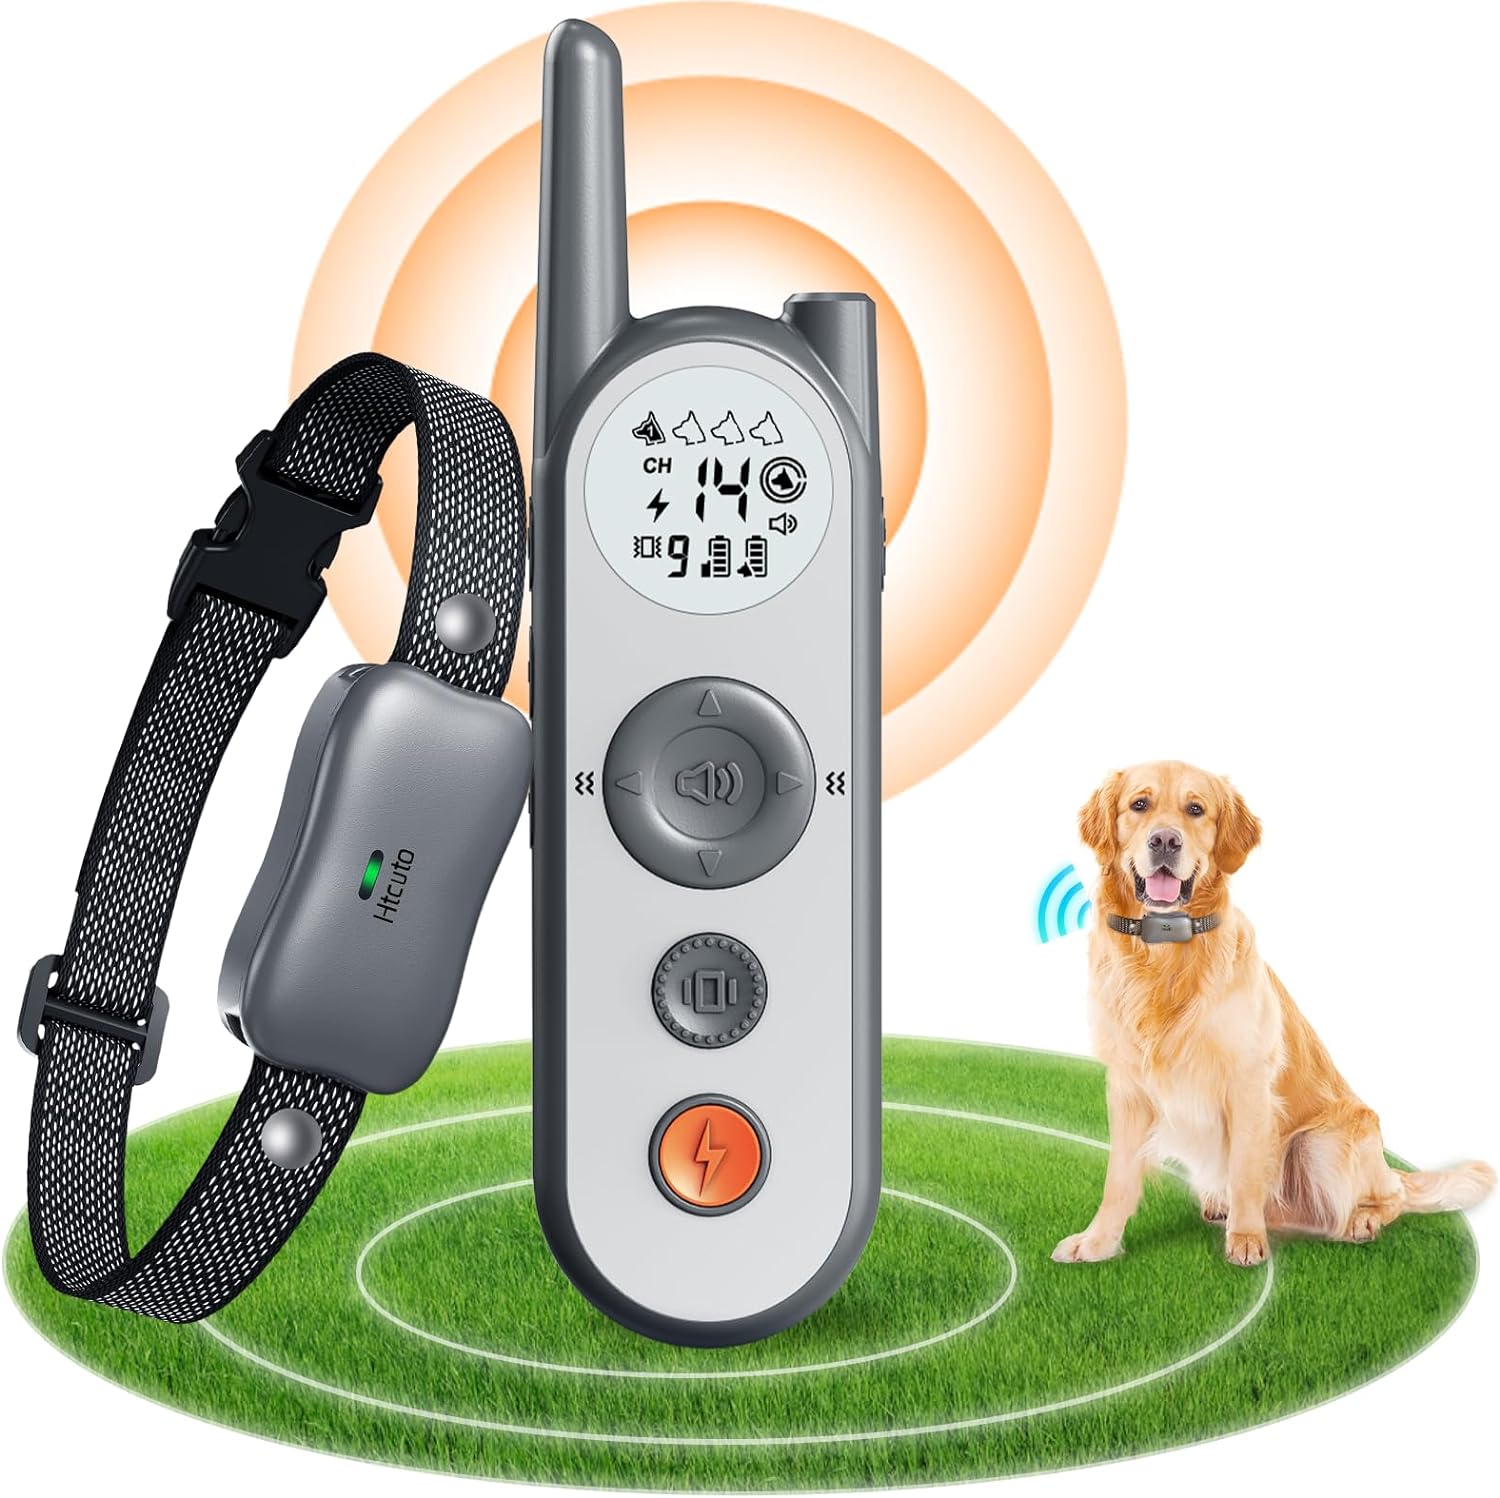 Wireless Dog Fence (10-130lbs) : 3500ft Fence Range, Training Collar 6000ft Remote 2-in-1, Rechargeable Waterproof, Keypad Lock, LED Light, 3 Training Modes - Beep, Vibration (Grey*1)…